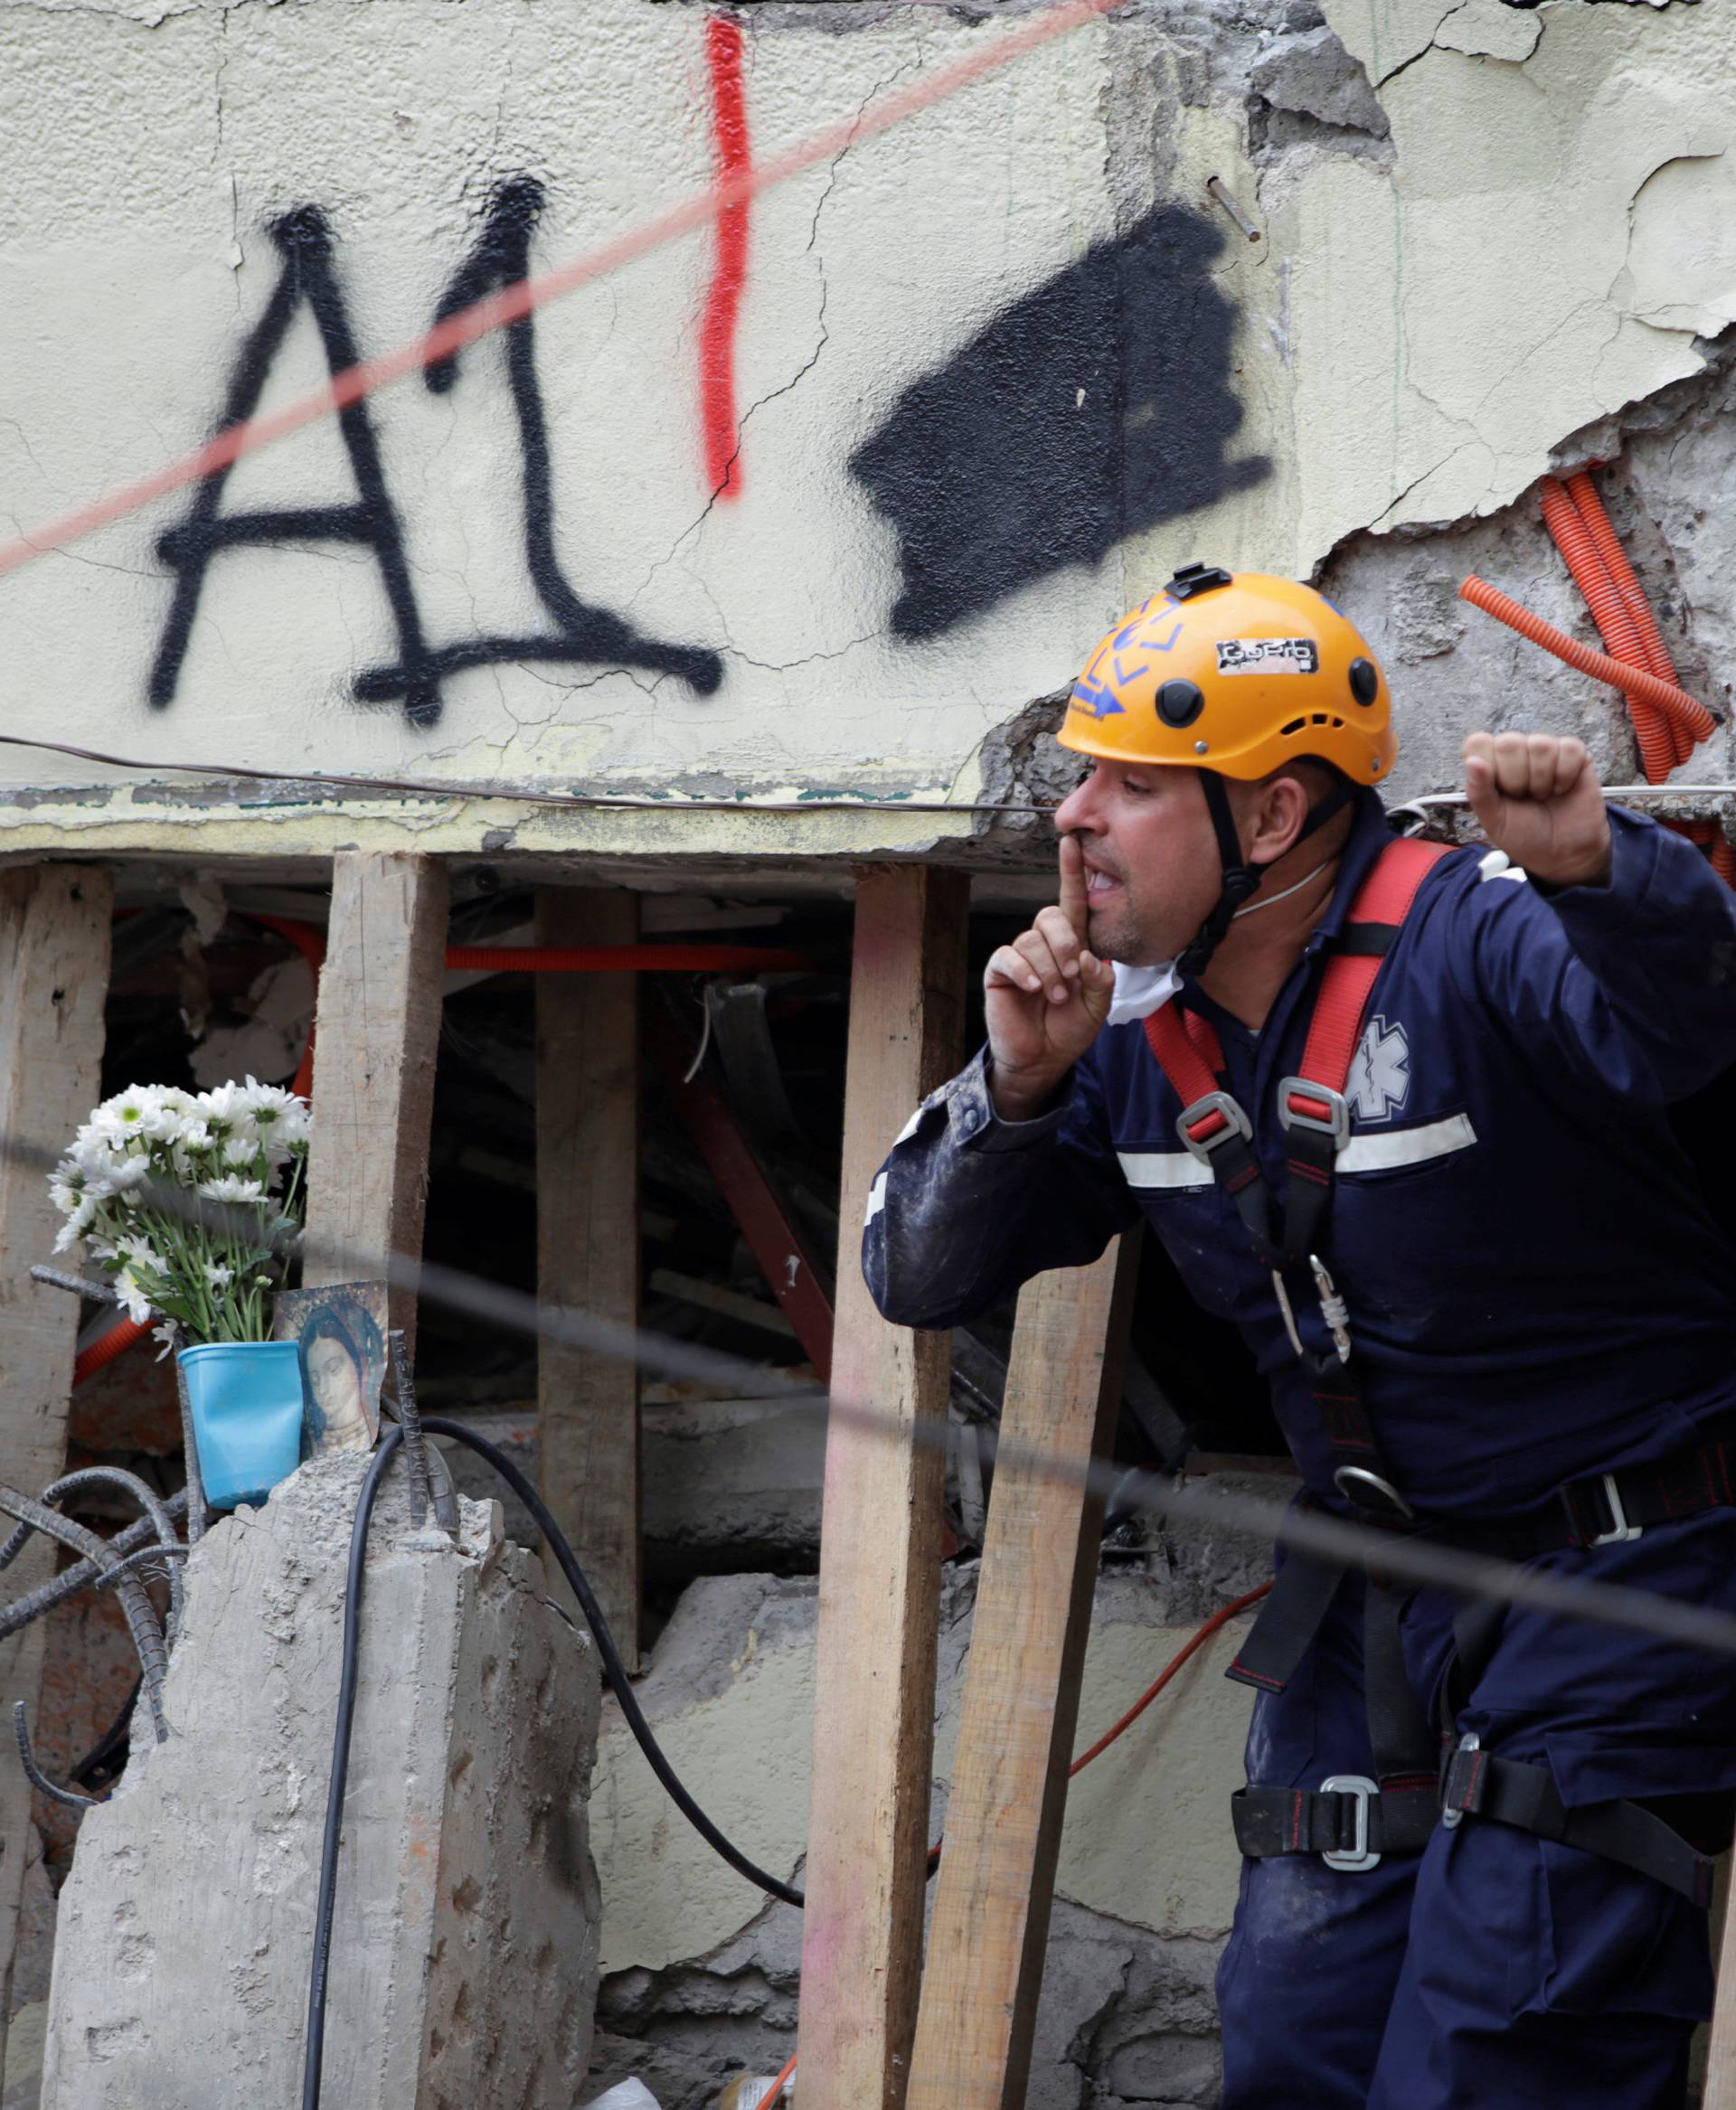 A paramedic gestures during a search for students at the Enrique Rebsamen school after an earthquake in Mexico City